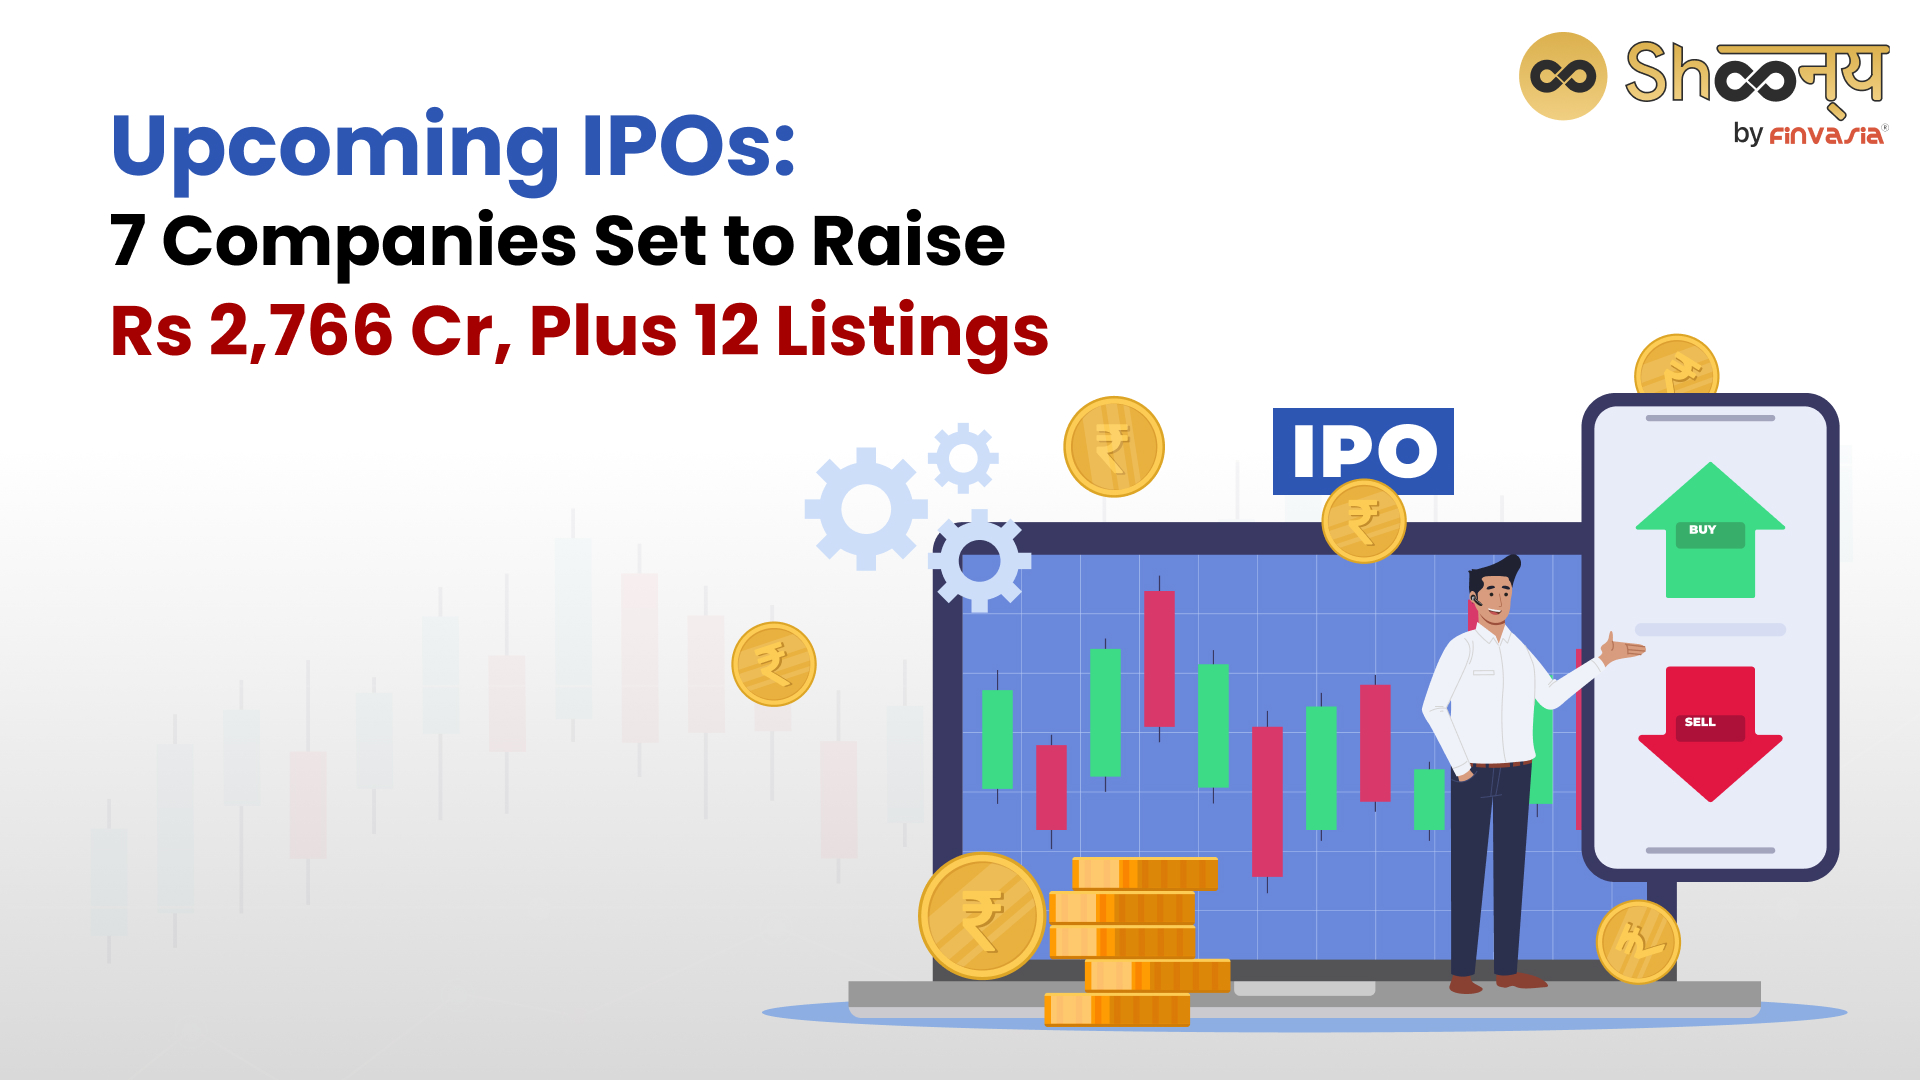 Upcoming IPOs This Week: 7 Companies Set to Raise 2,766 Cr